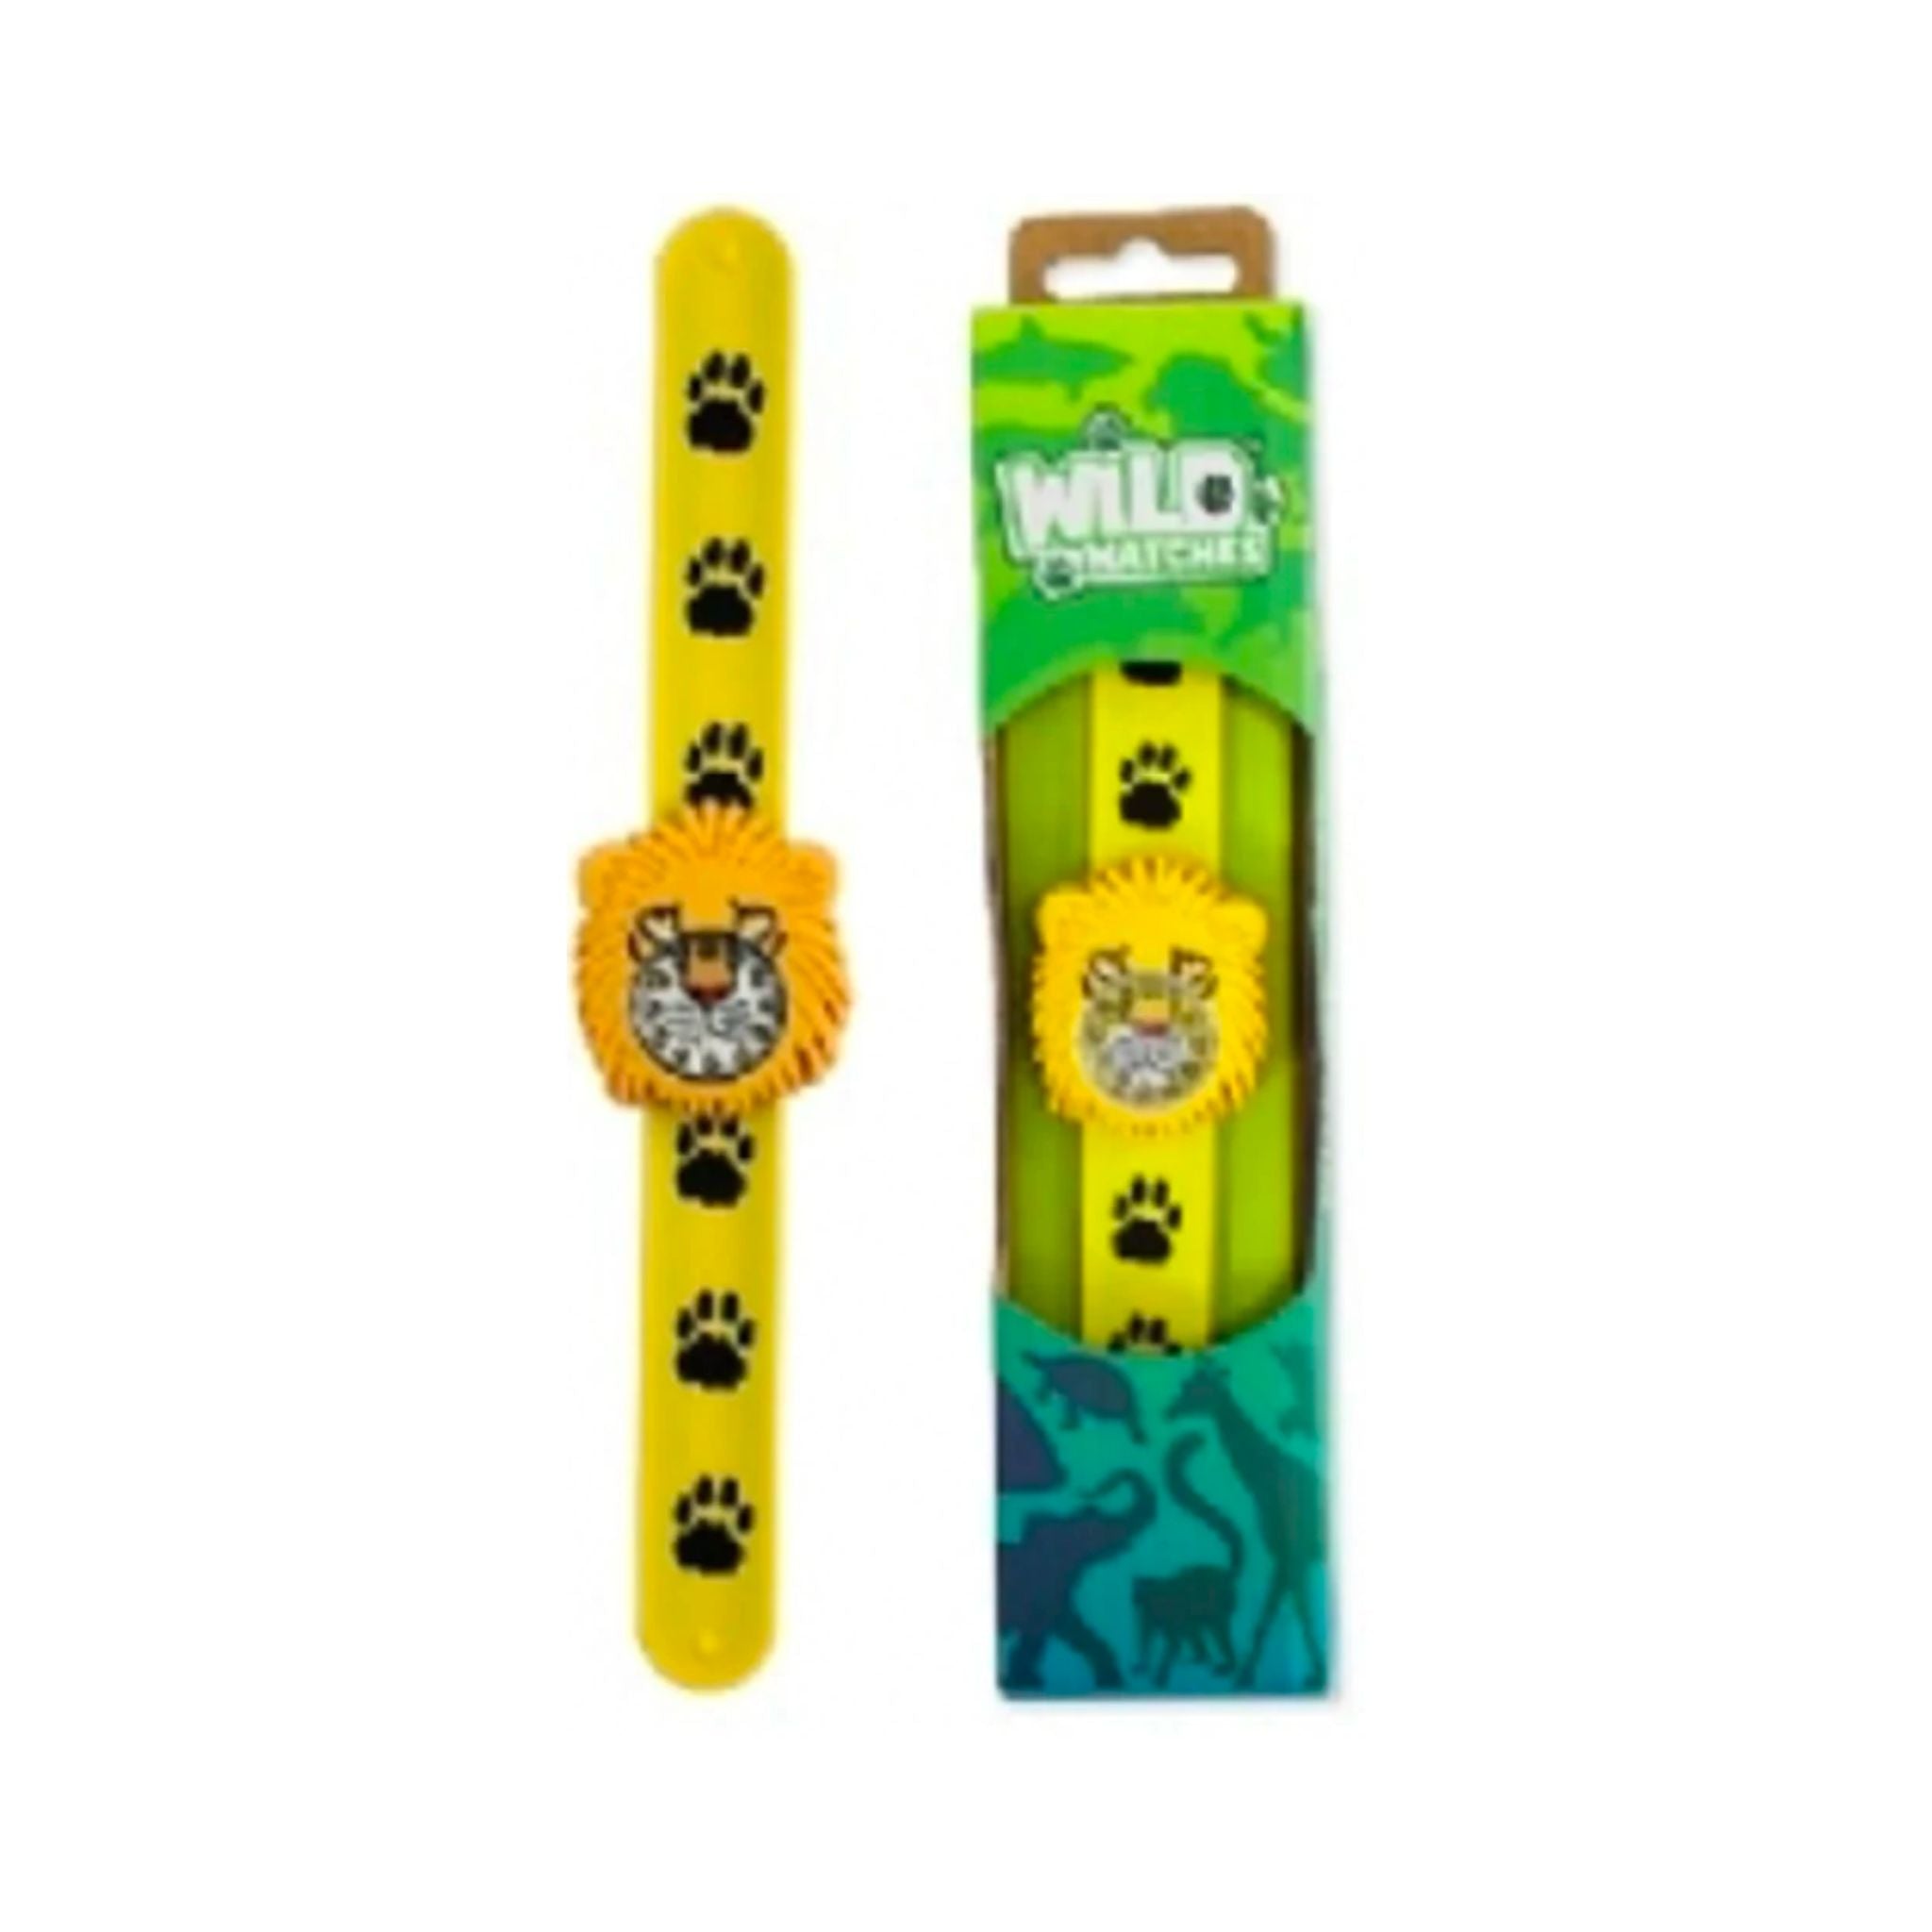 Wild Watches Lion Snap Band Watch